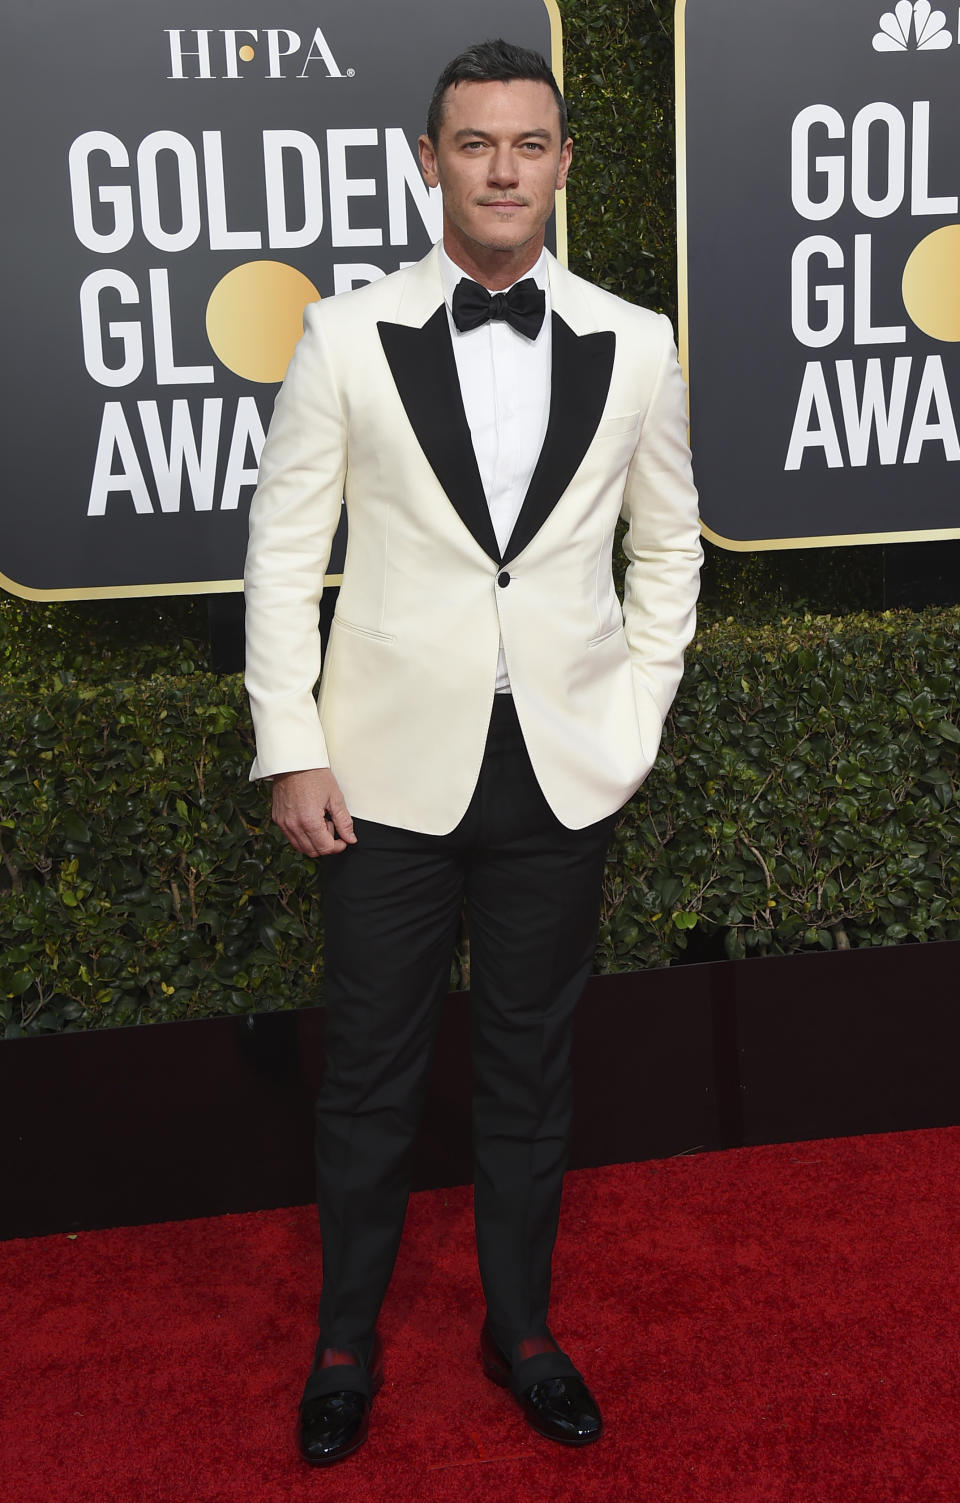 FILE - Luke Evans arrives at the 76th annual Golden Globe Awards on Jan. 6, 2019, in Beverly Hills, Calif. Evans turns 42 on April 15. (Photo by Jordan Strauss/Invision/AP, File)